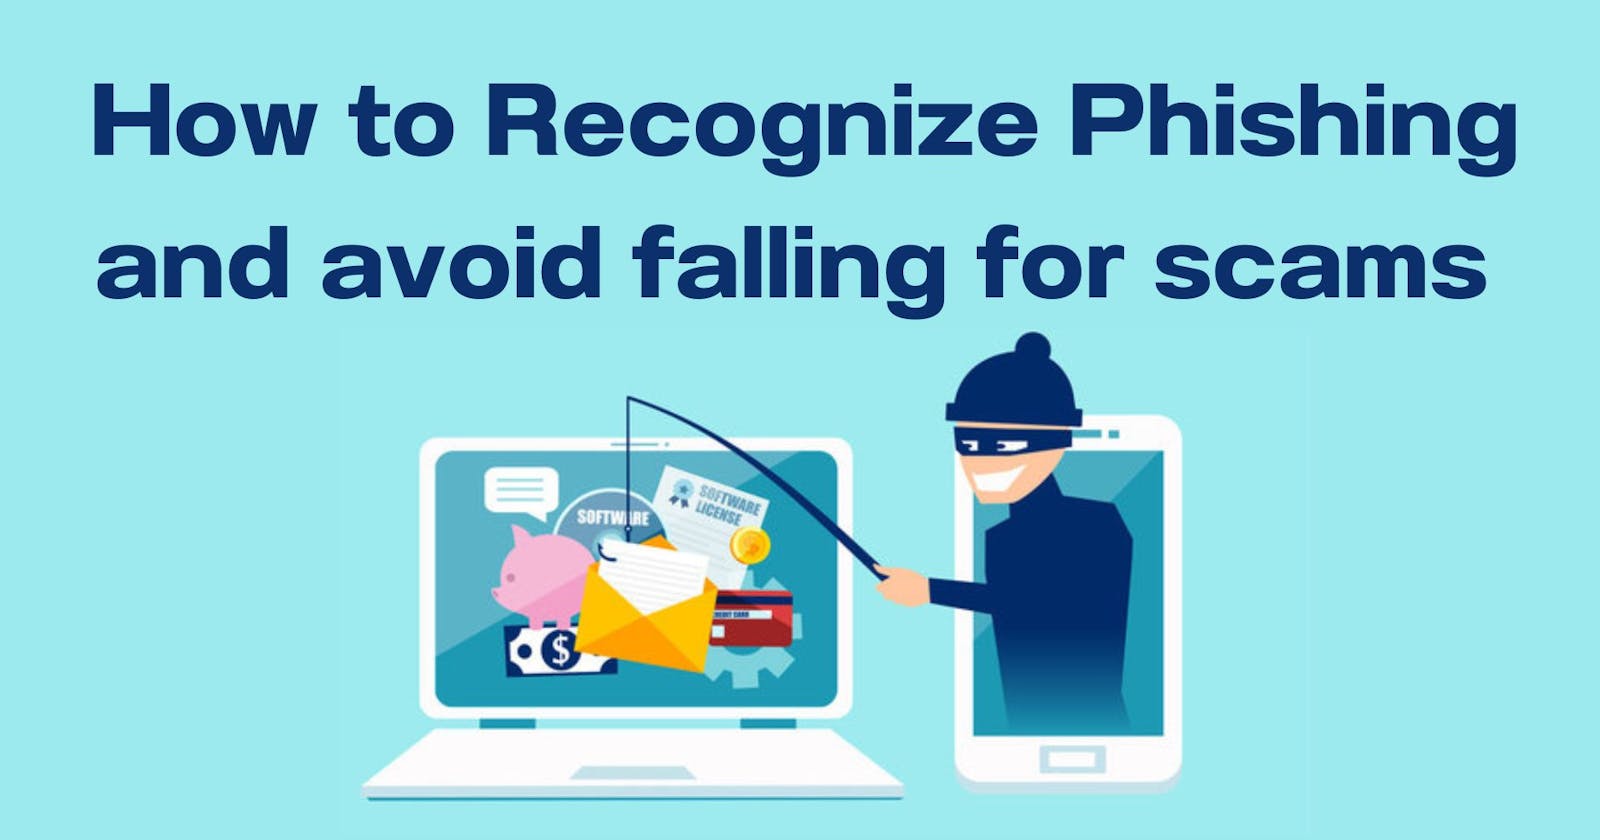 How to Recognize Phishing and avoid falling for scams